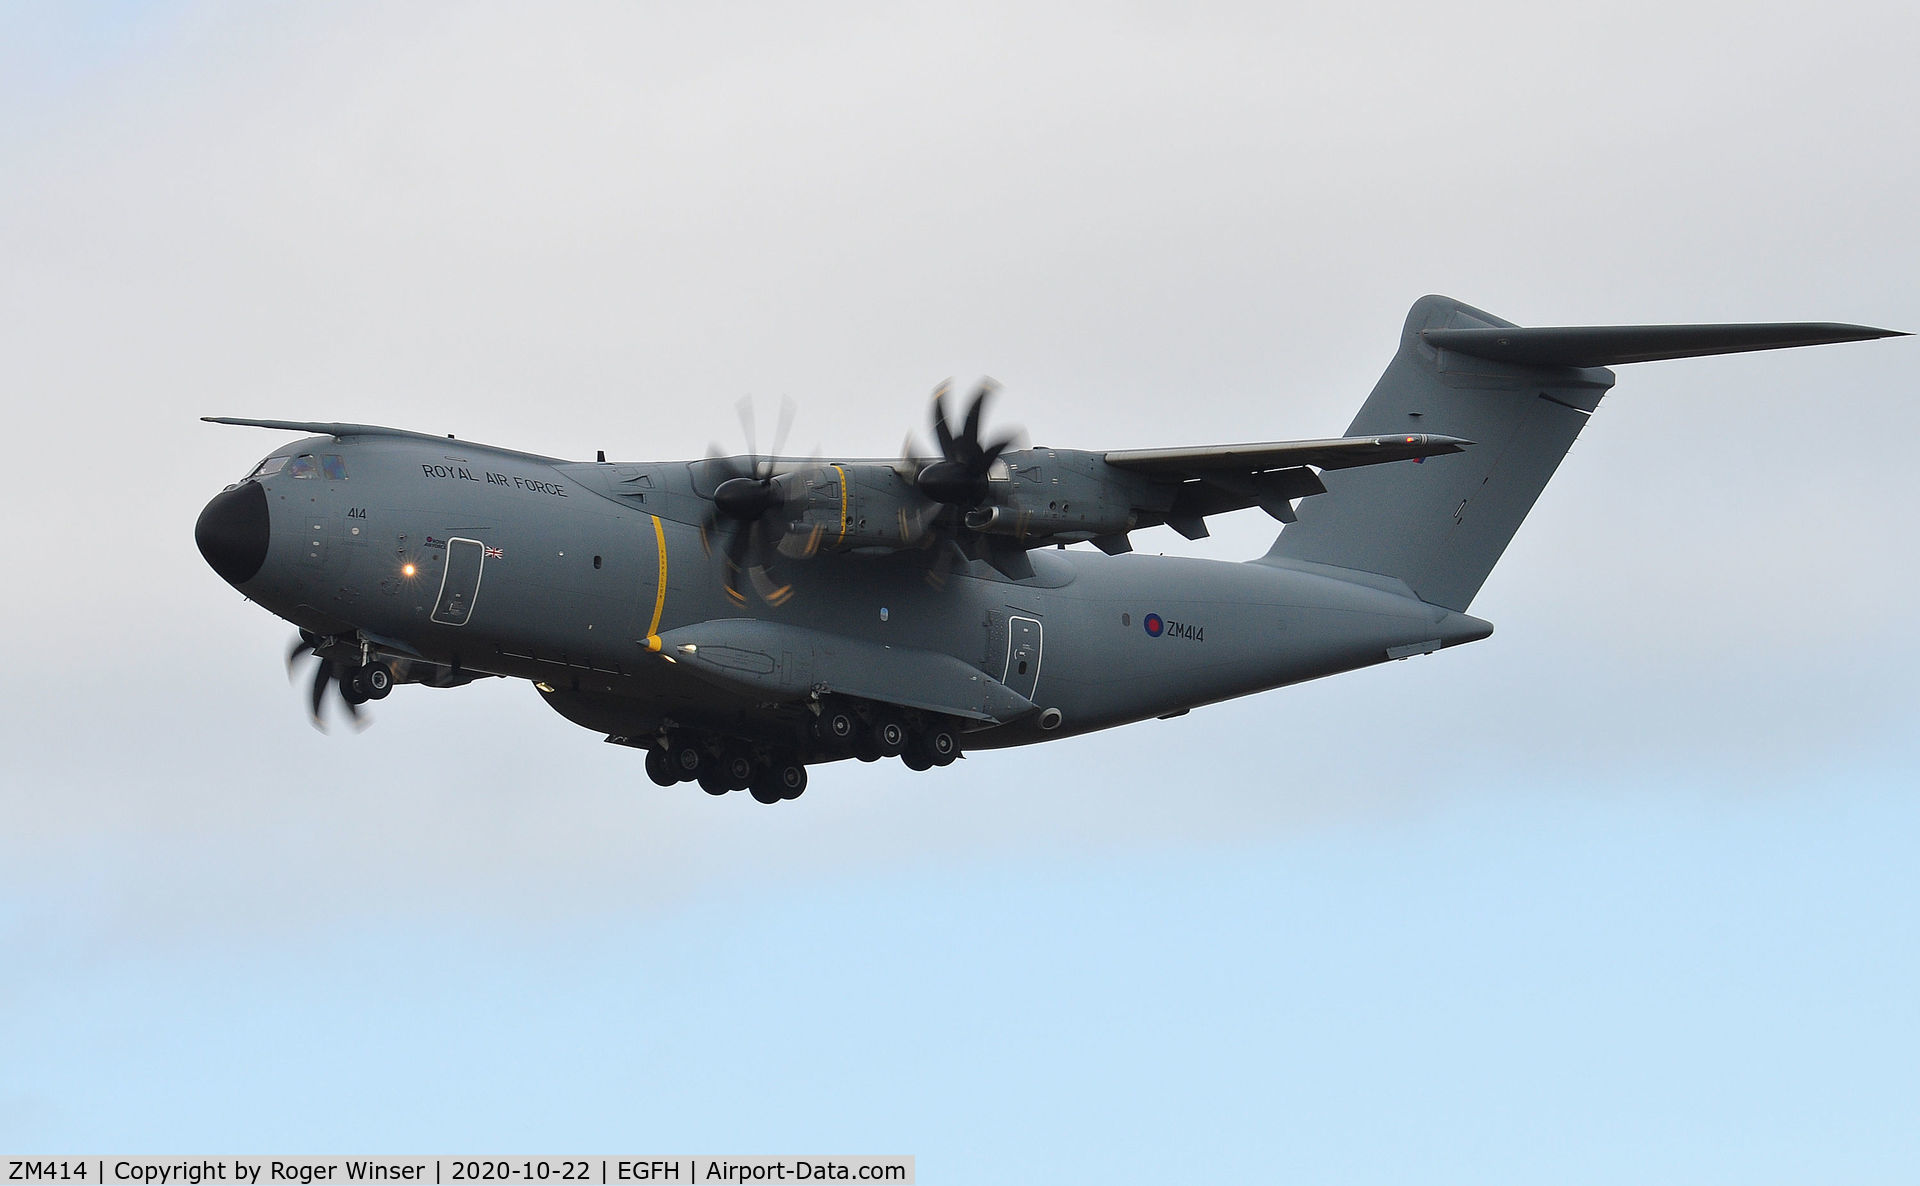 ZM414, 2017 Airbus A400M-180 Atlas C.1 C/N 047, RAF Atlas C.1 aircraft ZM414 coded 414 making a practice approach to Runway 22